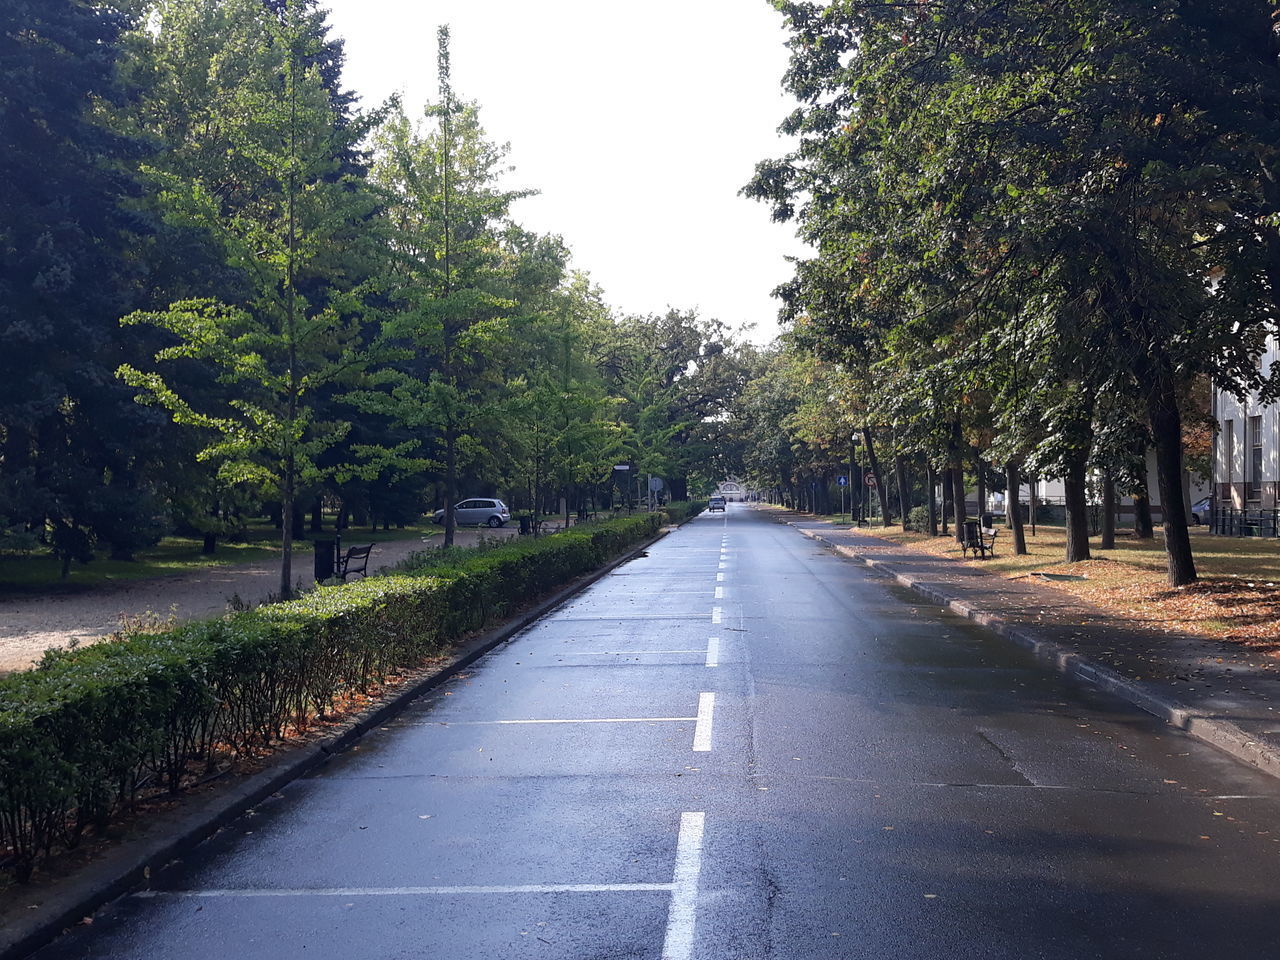 EMPTY ROAD ALONG TREES AND PLANTS